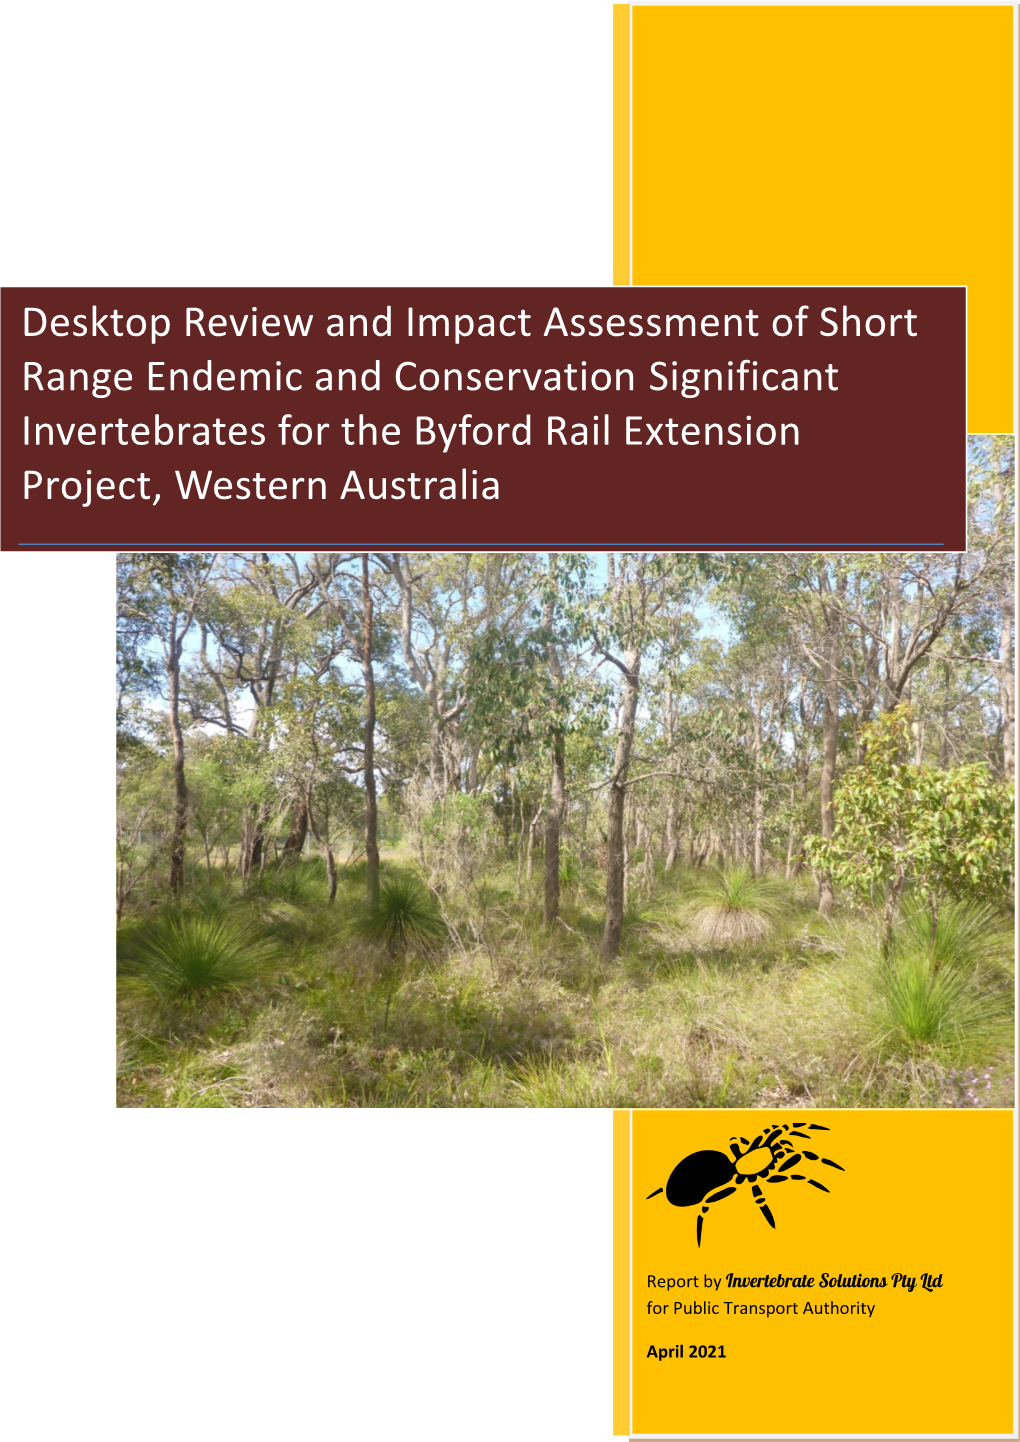 Desktop Review and Impact Assessment of Short Range Endemic and Conservation Significant Invertebrates for the Byford Rail Extension Project, Western Australia